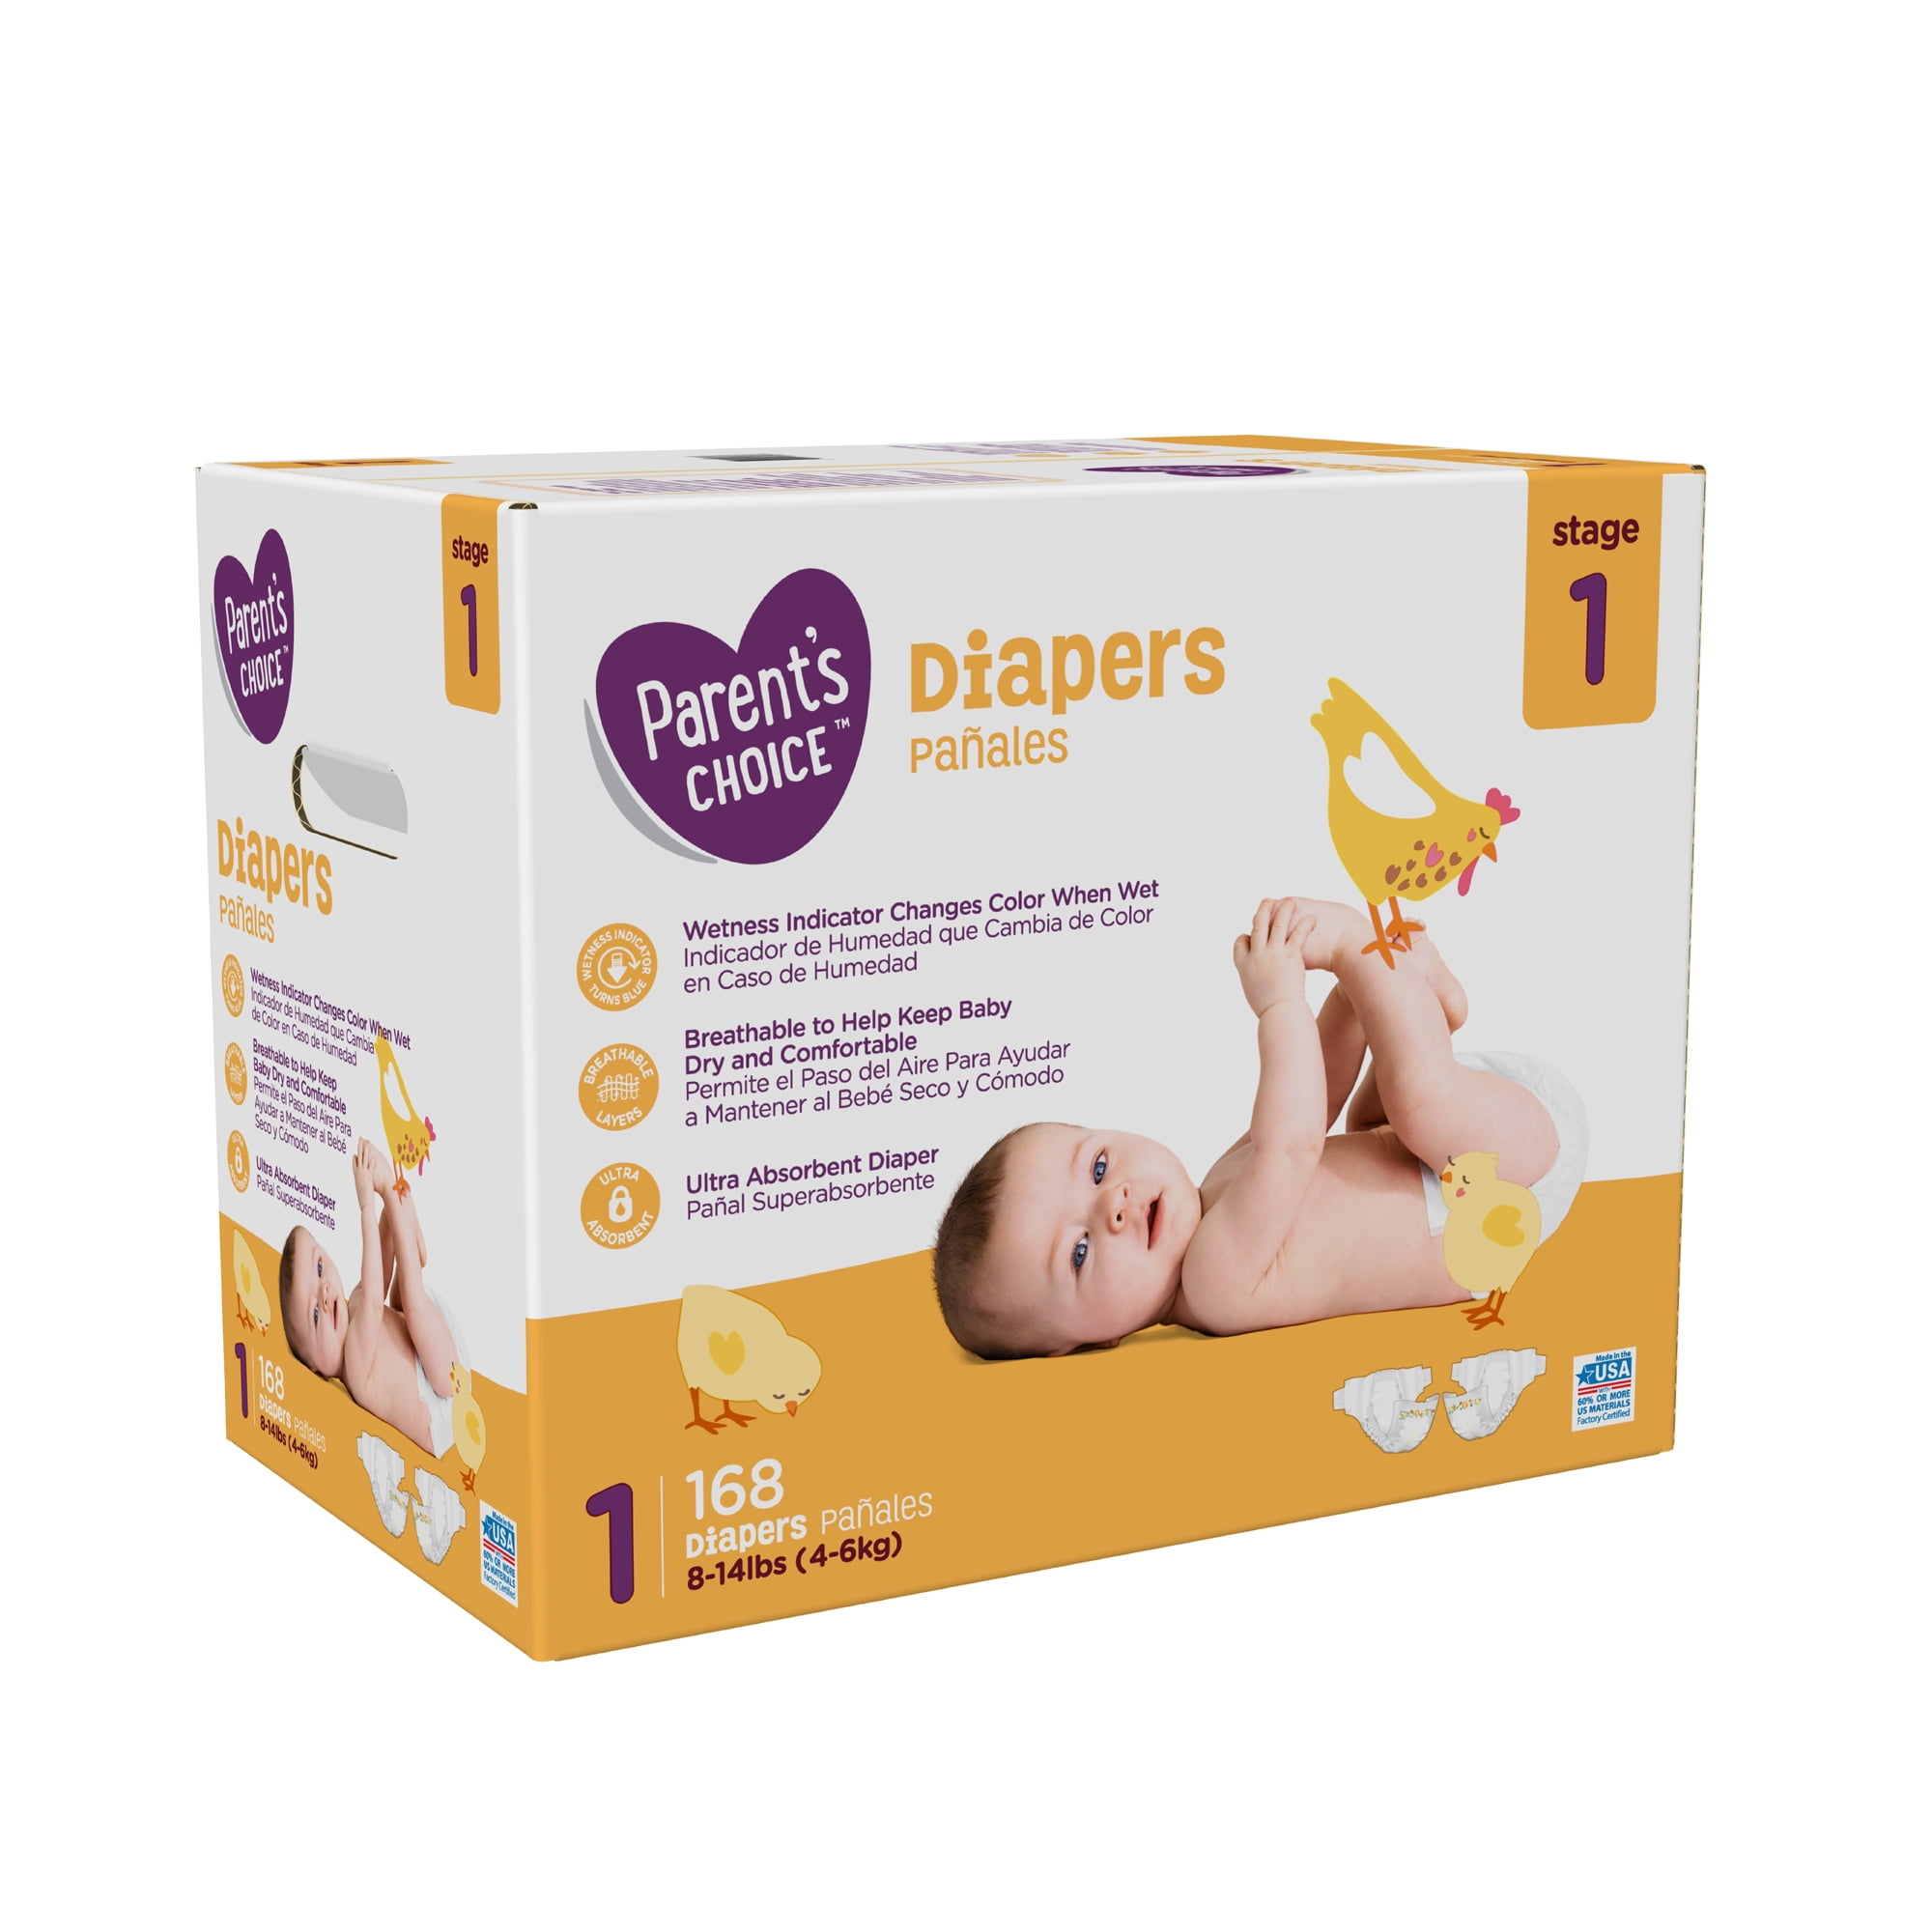 Parent's Choice Diapers, Size 1, 168 Diapers – Walmart Inventory